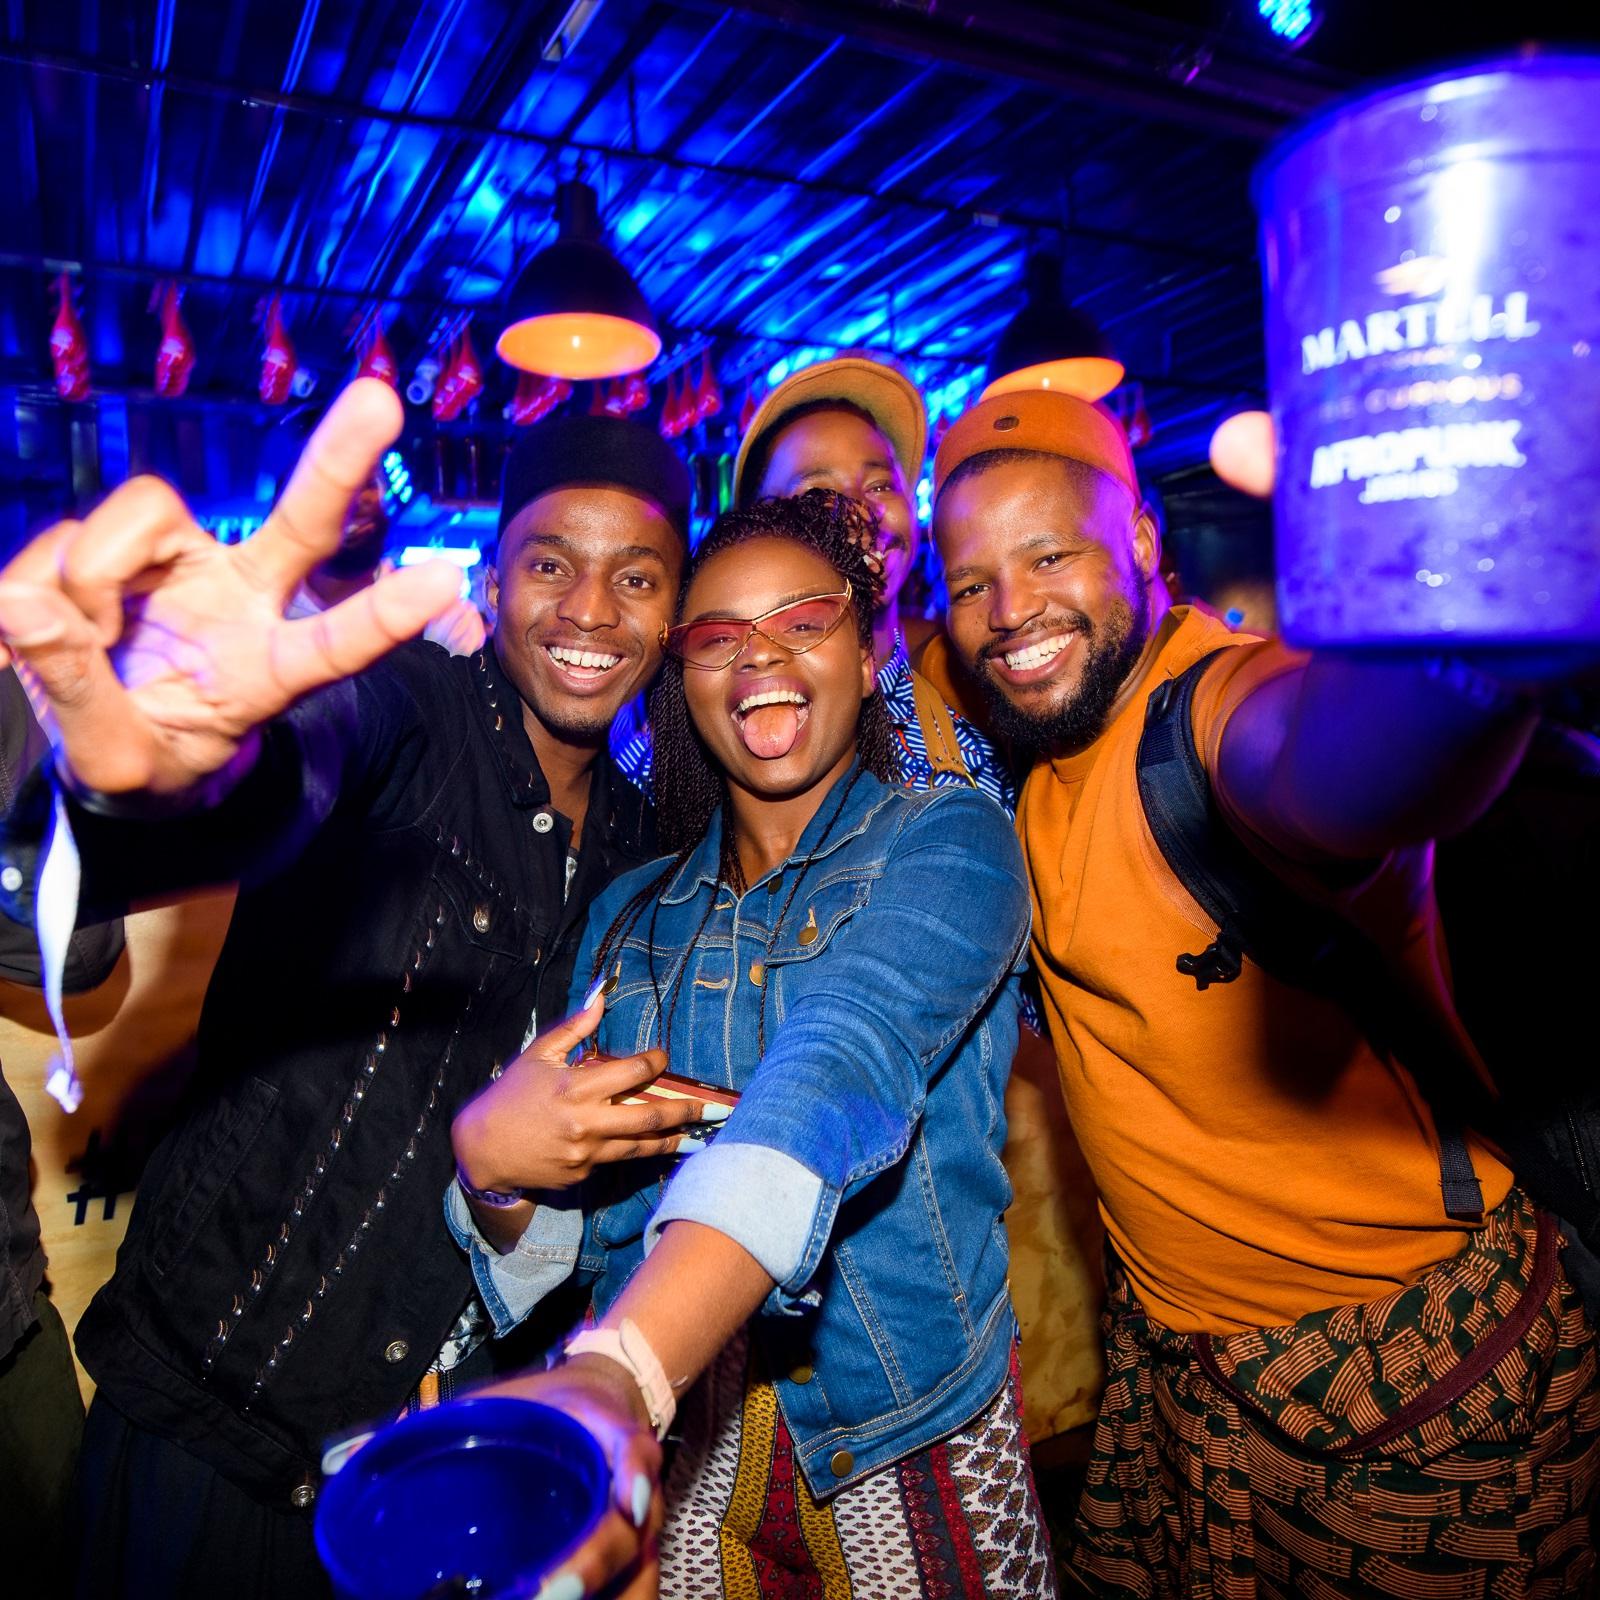 The Martell Afropunk festival experience